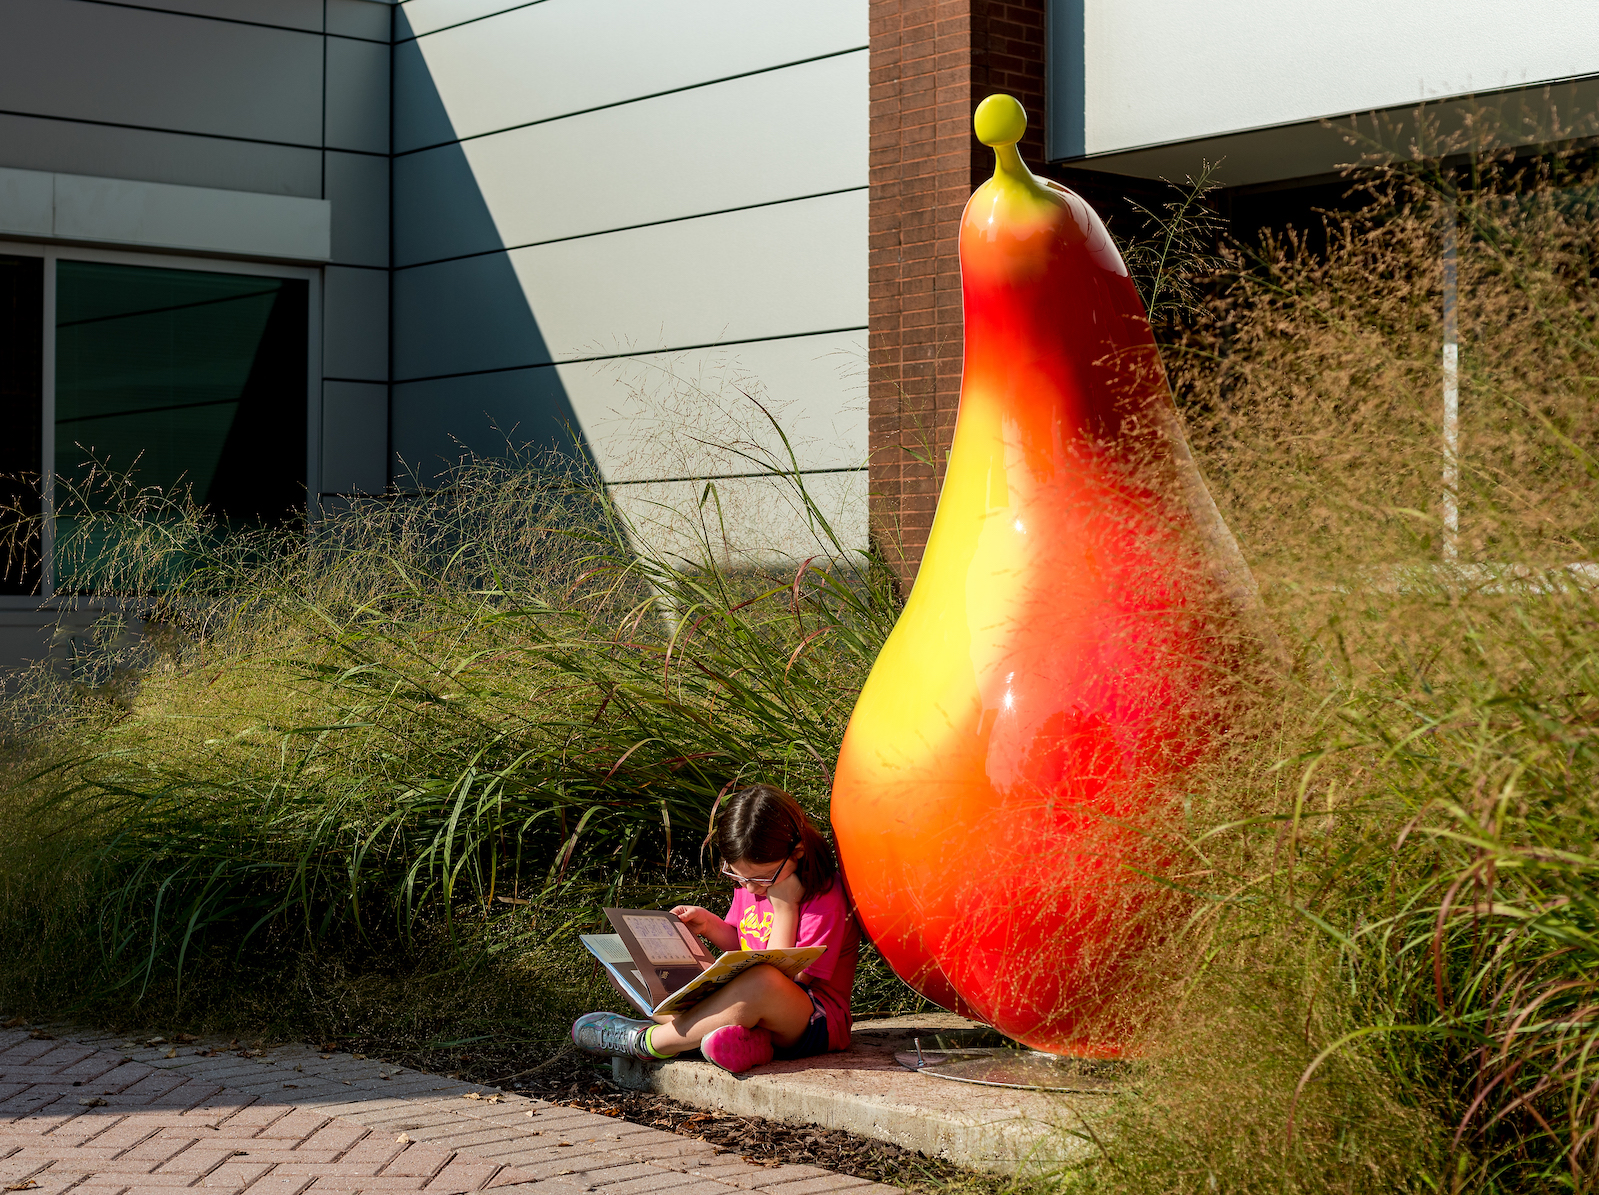 6-foot Pear sculpture at the George Howard Building in Ellicott City, MD